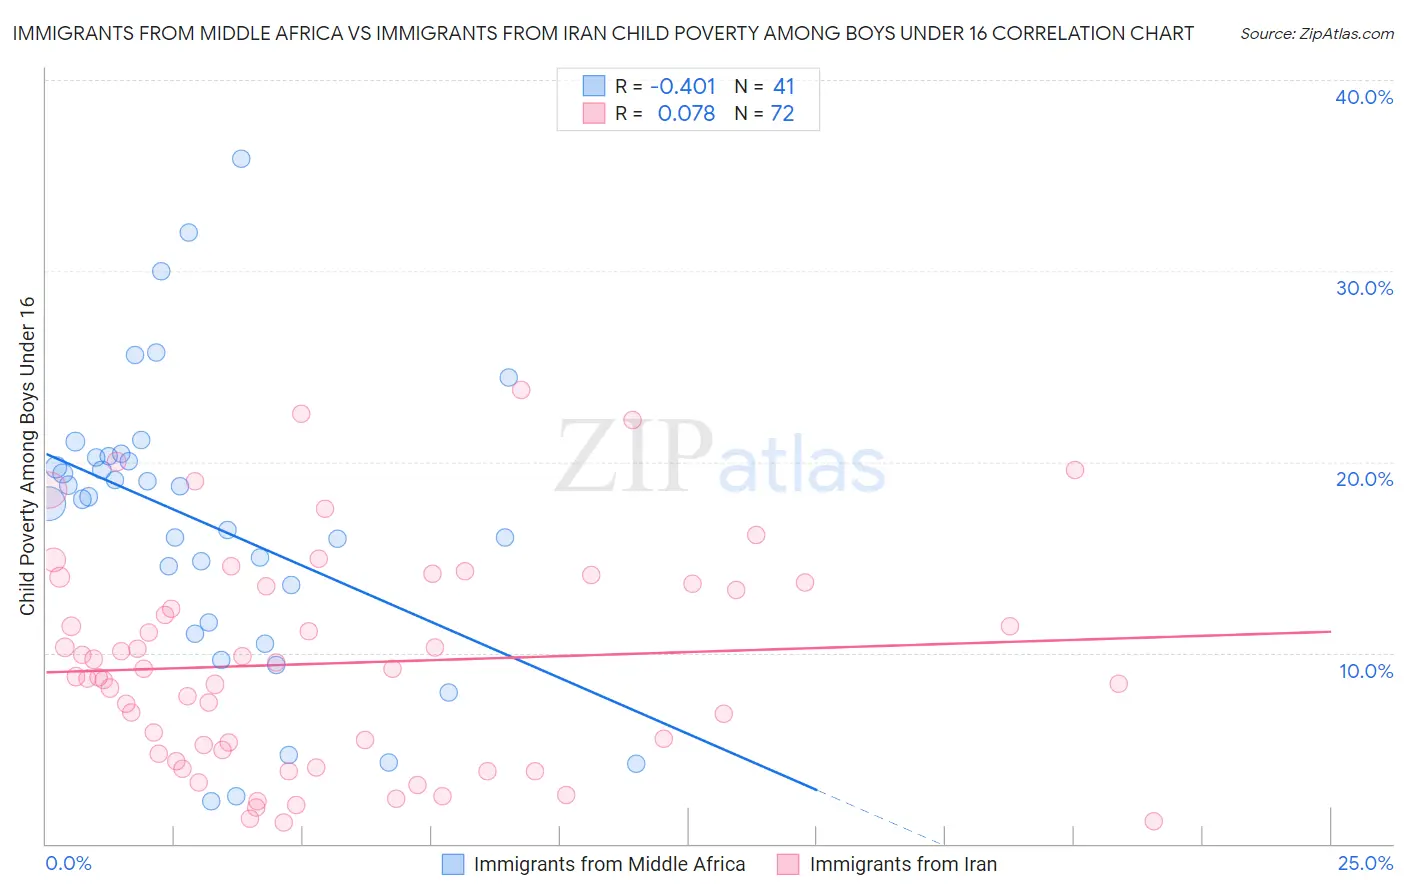 Immigrants from Middle Africa vs Immigrants from Iran Child Poverty Among Boys Under 16